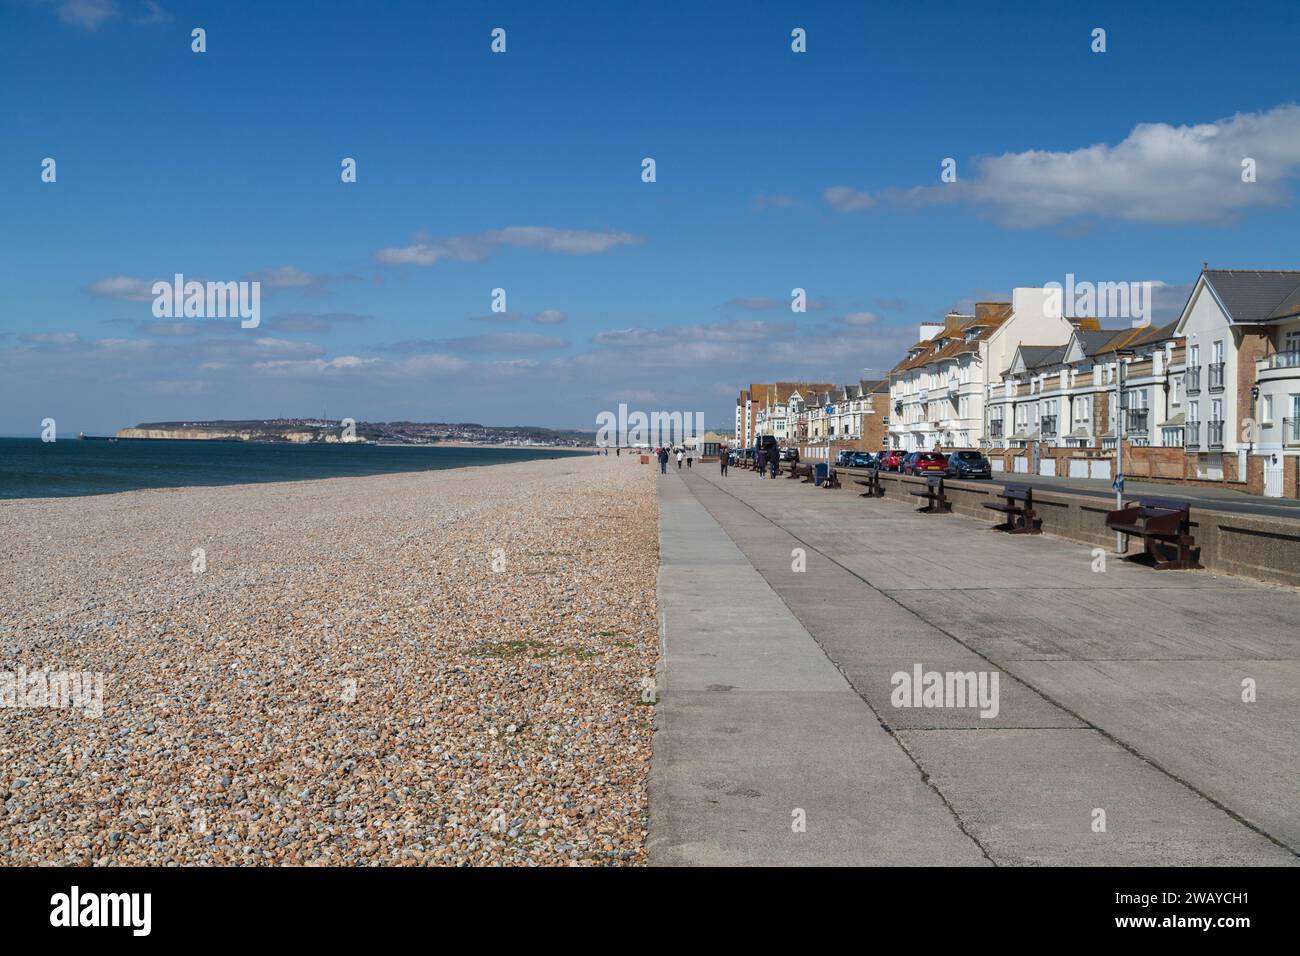 SEAFORD, UK - 3RD APRIL 23: Paths, roads and the beach in Seaford along the beachfront during the day. People can be seen on the paths Stock Photo